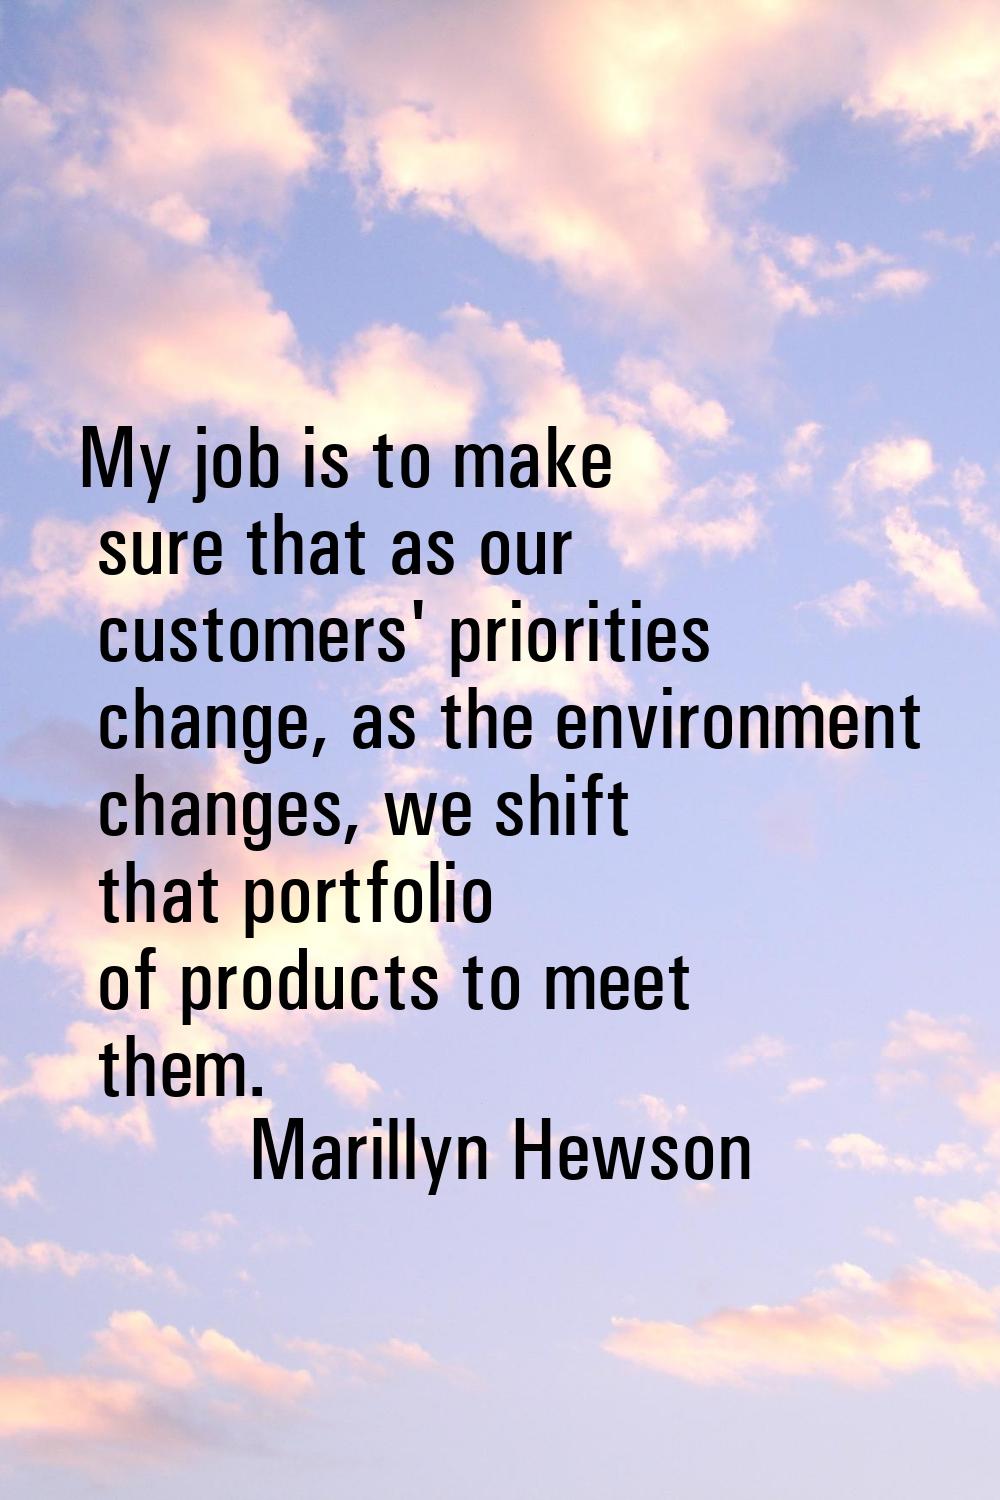 My job is to make sure that as our customers' priorities change, as the environment changes, we shi